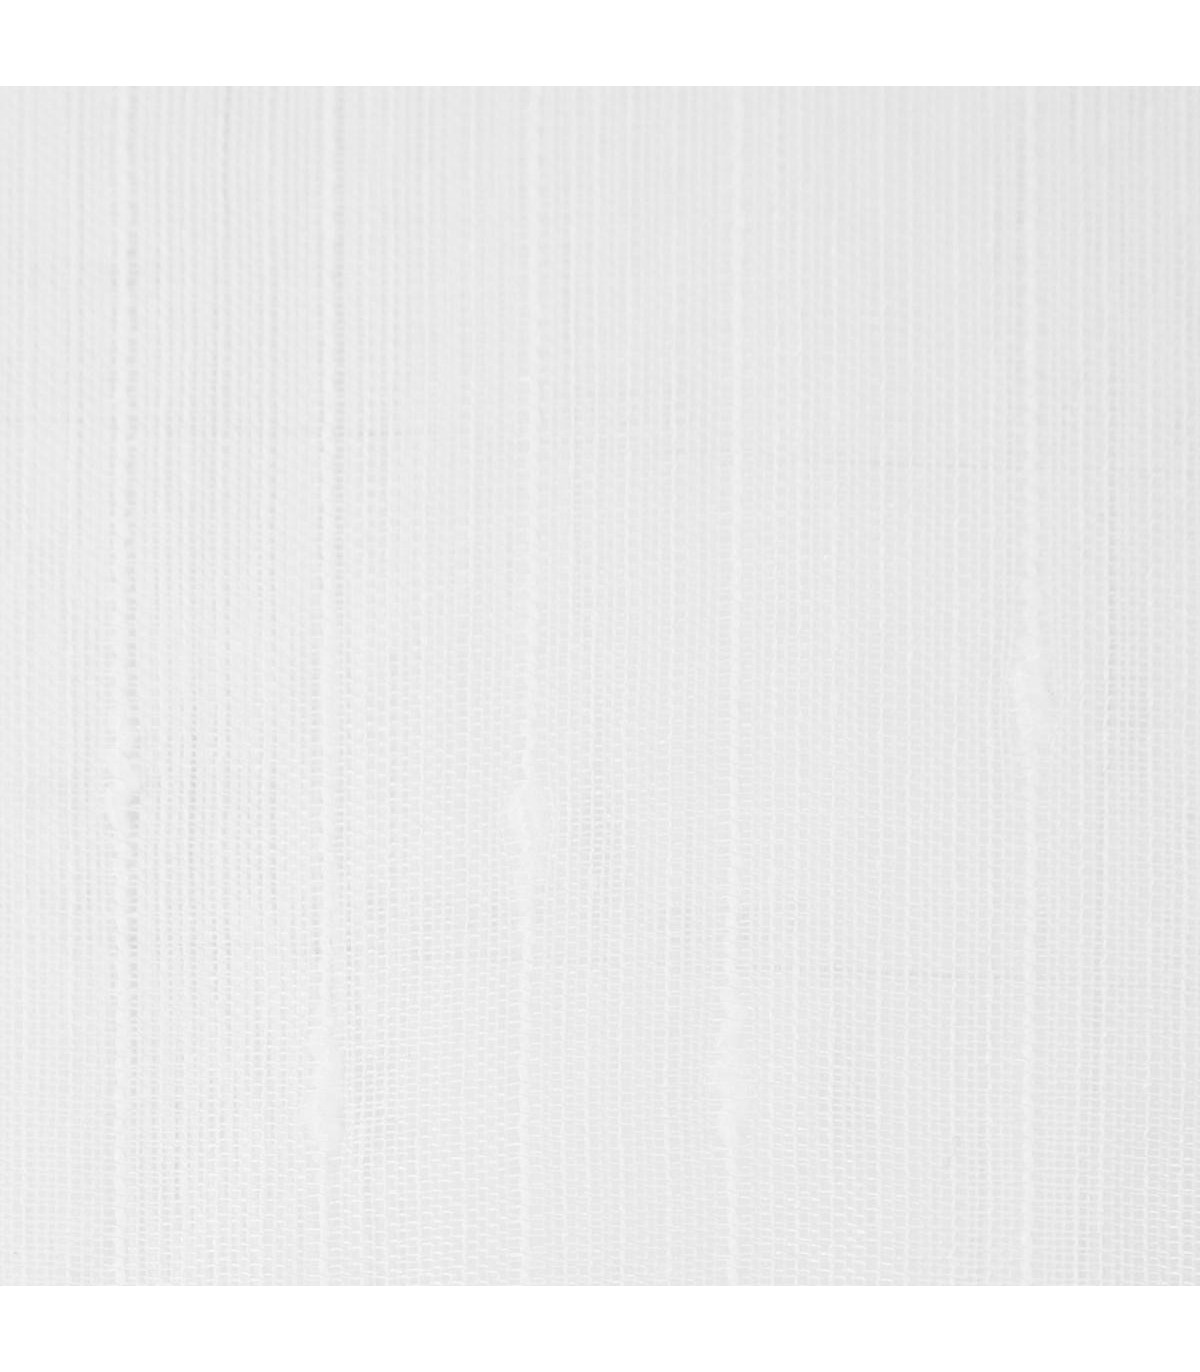 voilage-a-rayures-blanc-140-x-240-cm (1)